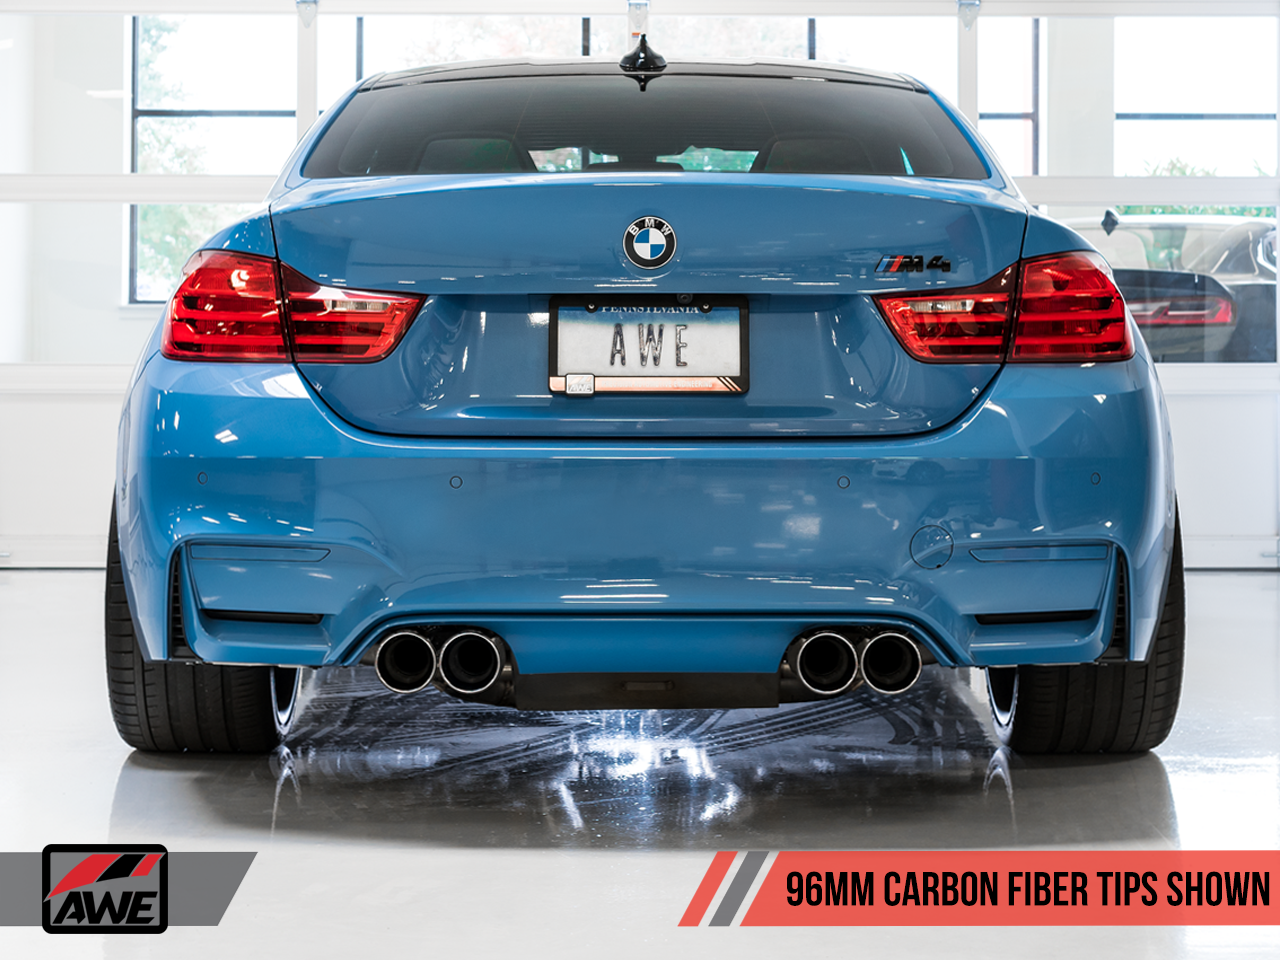 AWE SwitchPath™ Exhaust for BMW F8X M3/M4 - Resonated - Carbon Fiber Tips